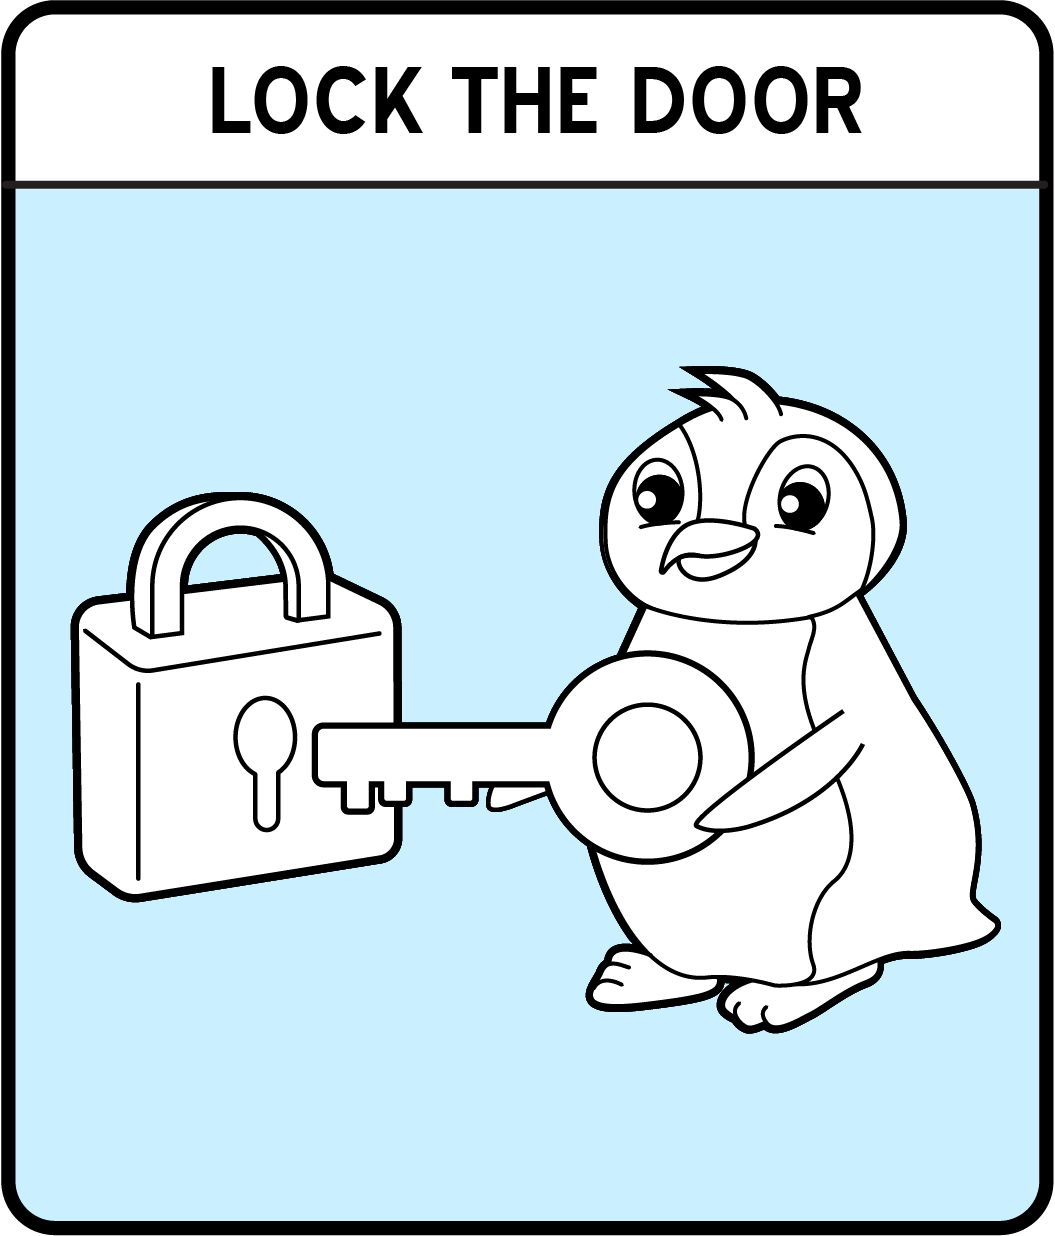 A colorable cartoon penguin holding a giant key locking a giant lock.